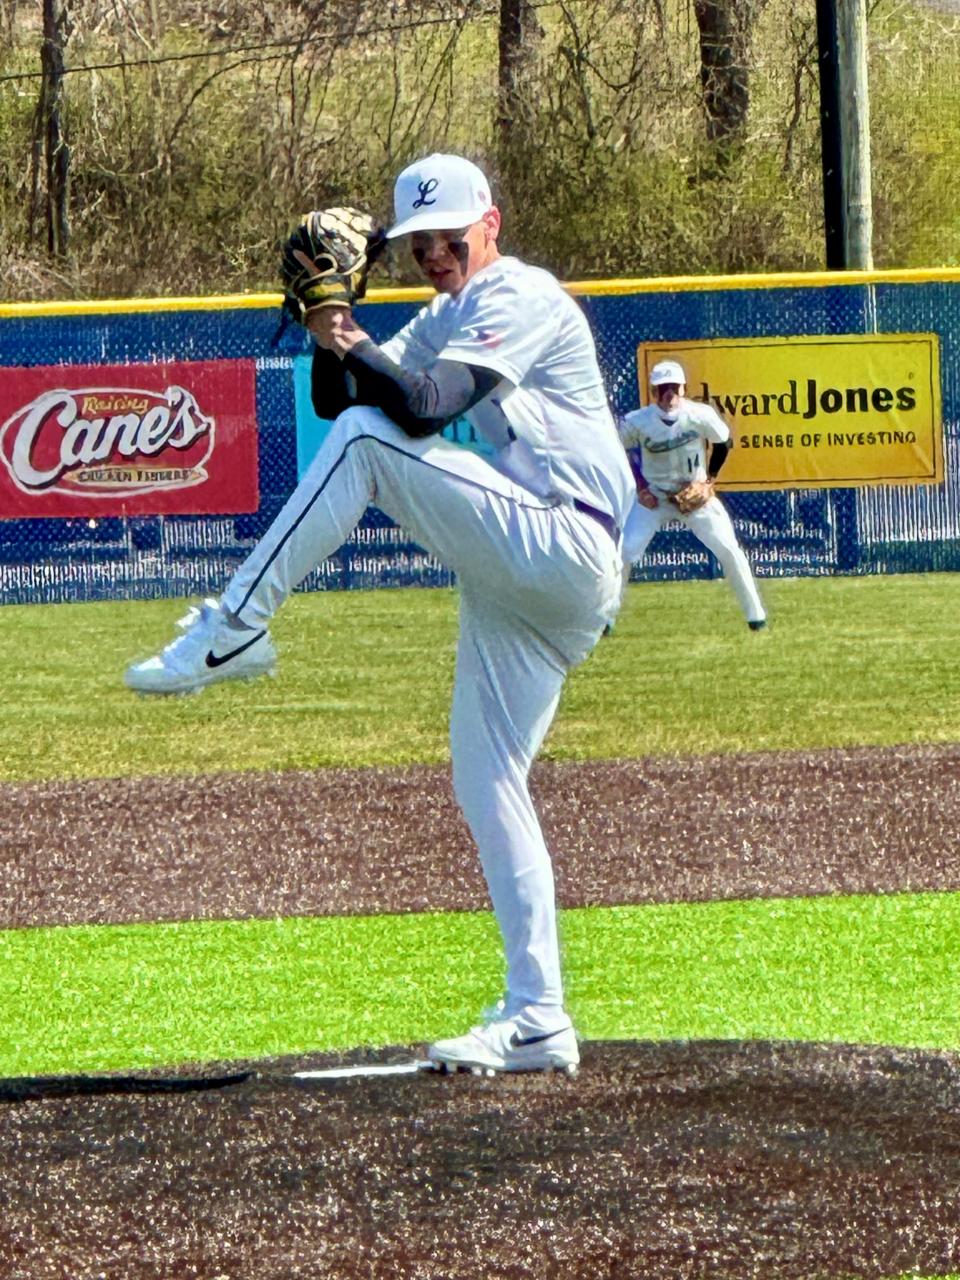 Lancaster junior pitcher Darren Ramsey gets set to fire a pitch against Licking Heights on Saturday. The Golden Gales fell short, losing a 4-1 nonconference game at England Field.